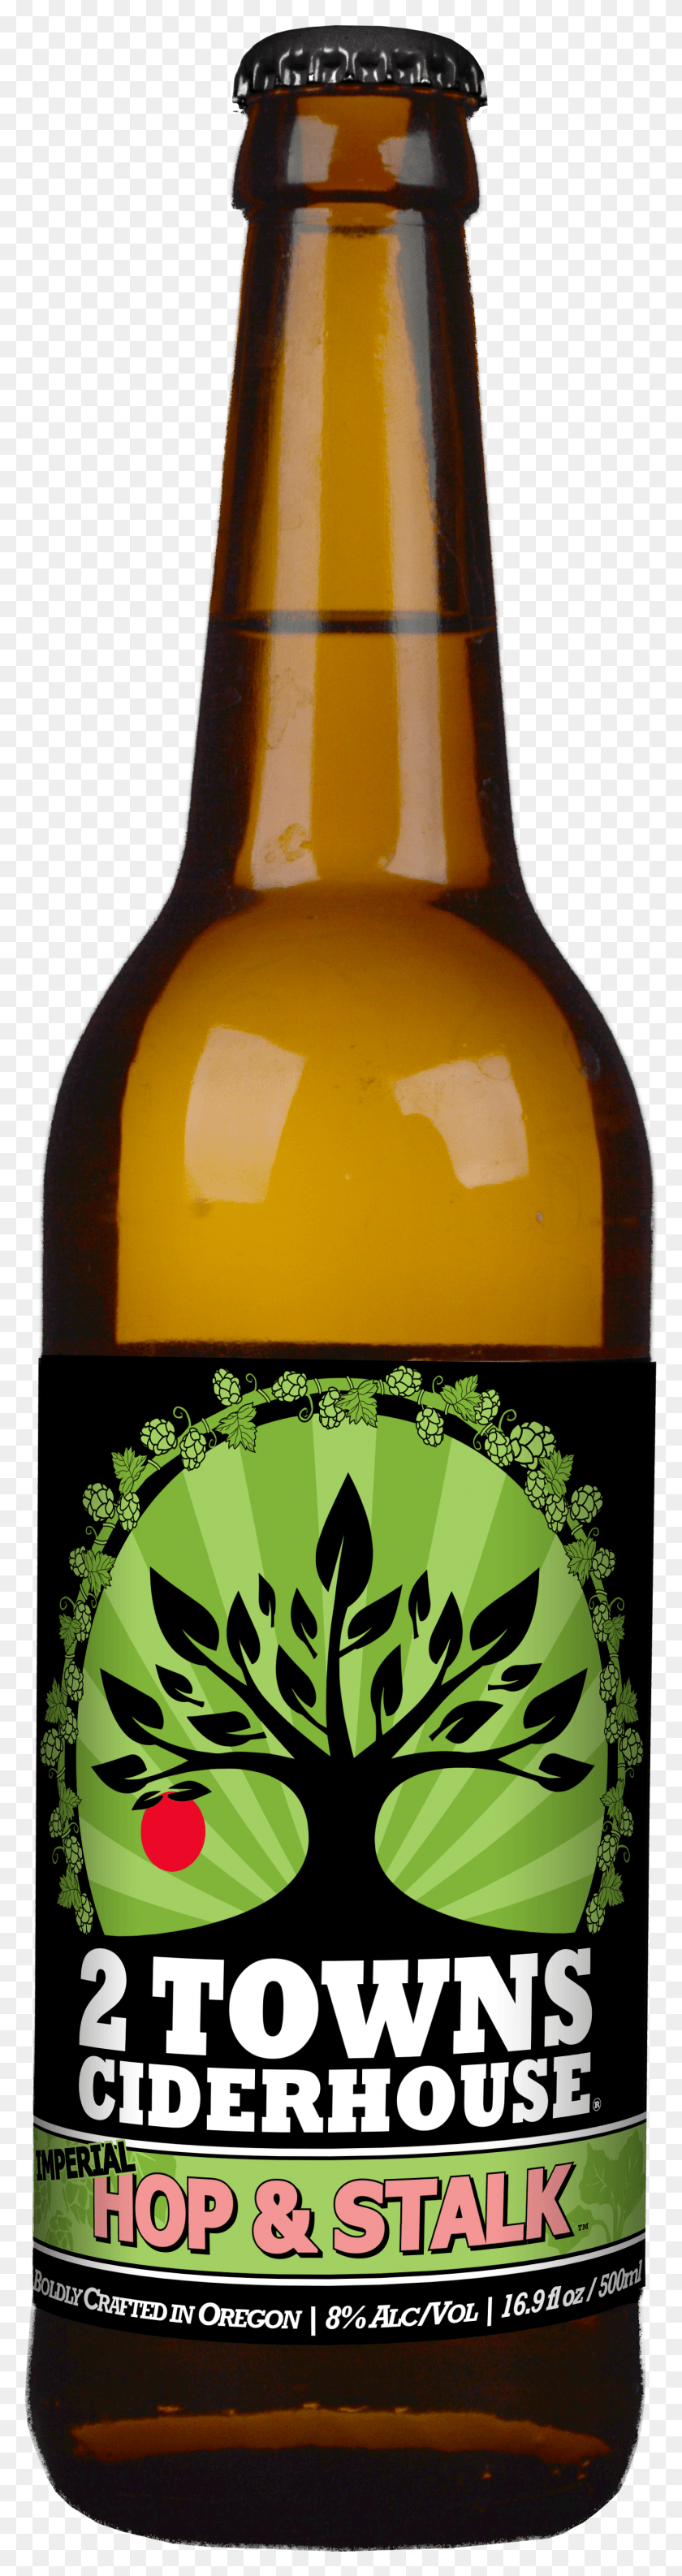 1395x5566 Towns Ciderhouse Hop And Stalk 2 Towns Cider Descargar Hd Png